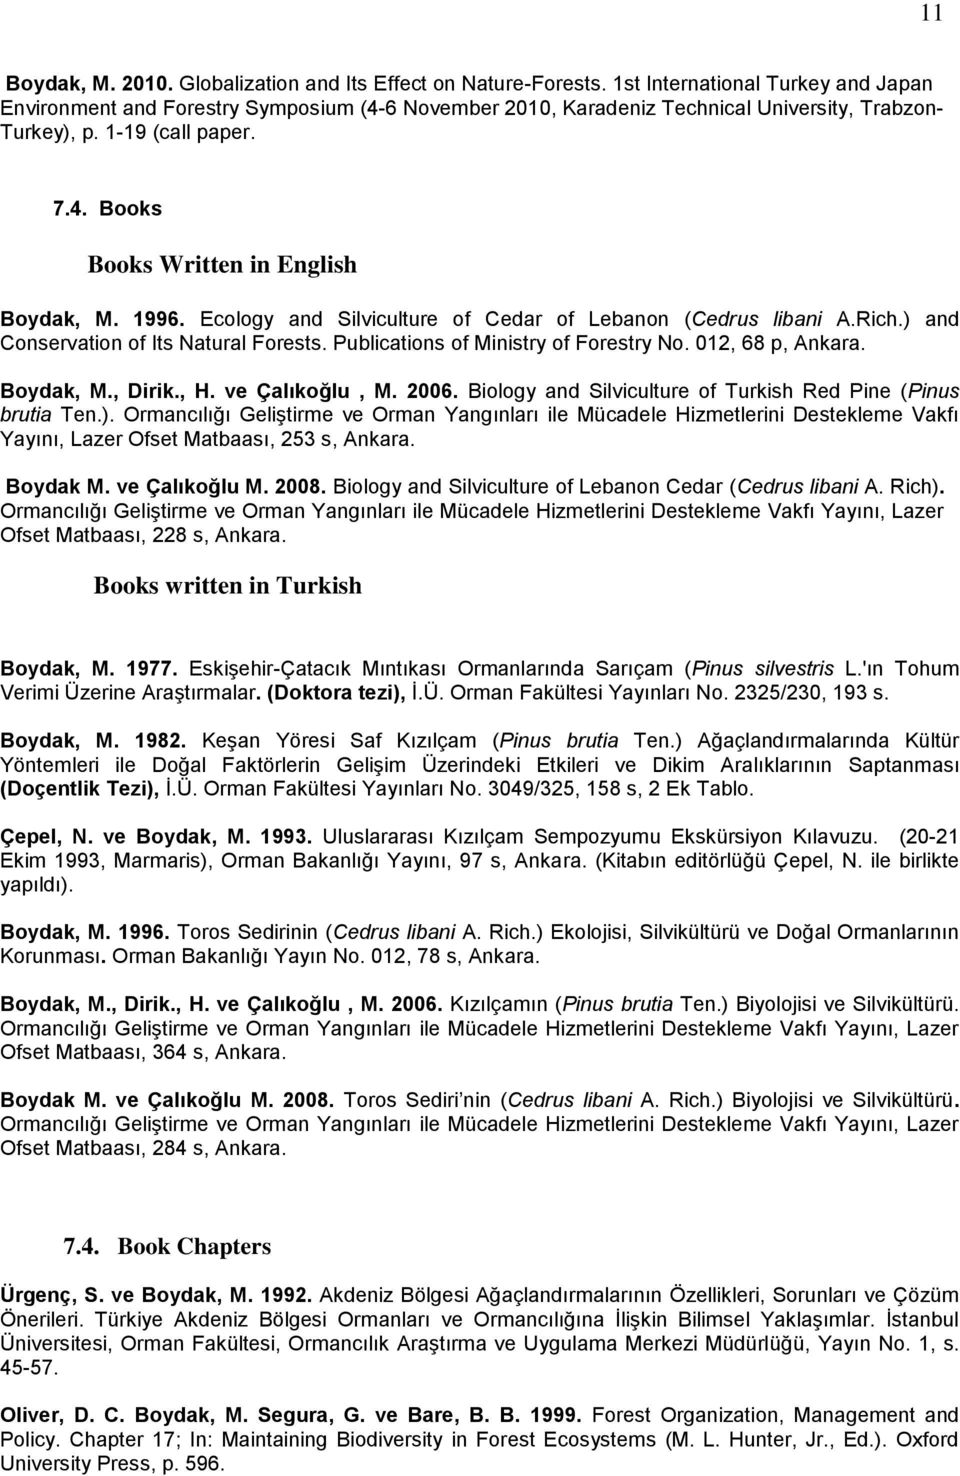 1996. Ecology and Silviculture of Cedar of Lebanon (Cedrus libani A.Rich.) and Conservation of Its Natural Forests. Publications of Ministry of Forestry No. 012, 68 p, Ankara. Boydak, M., Dirik., H.